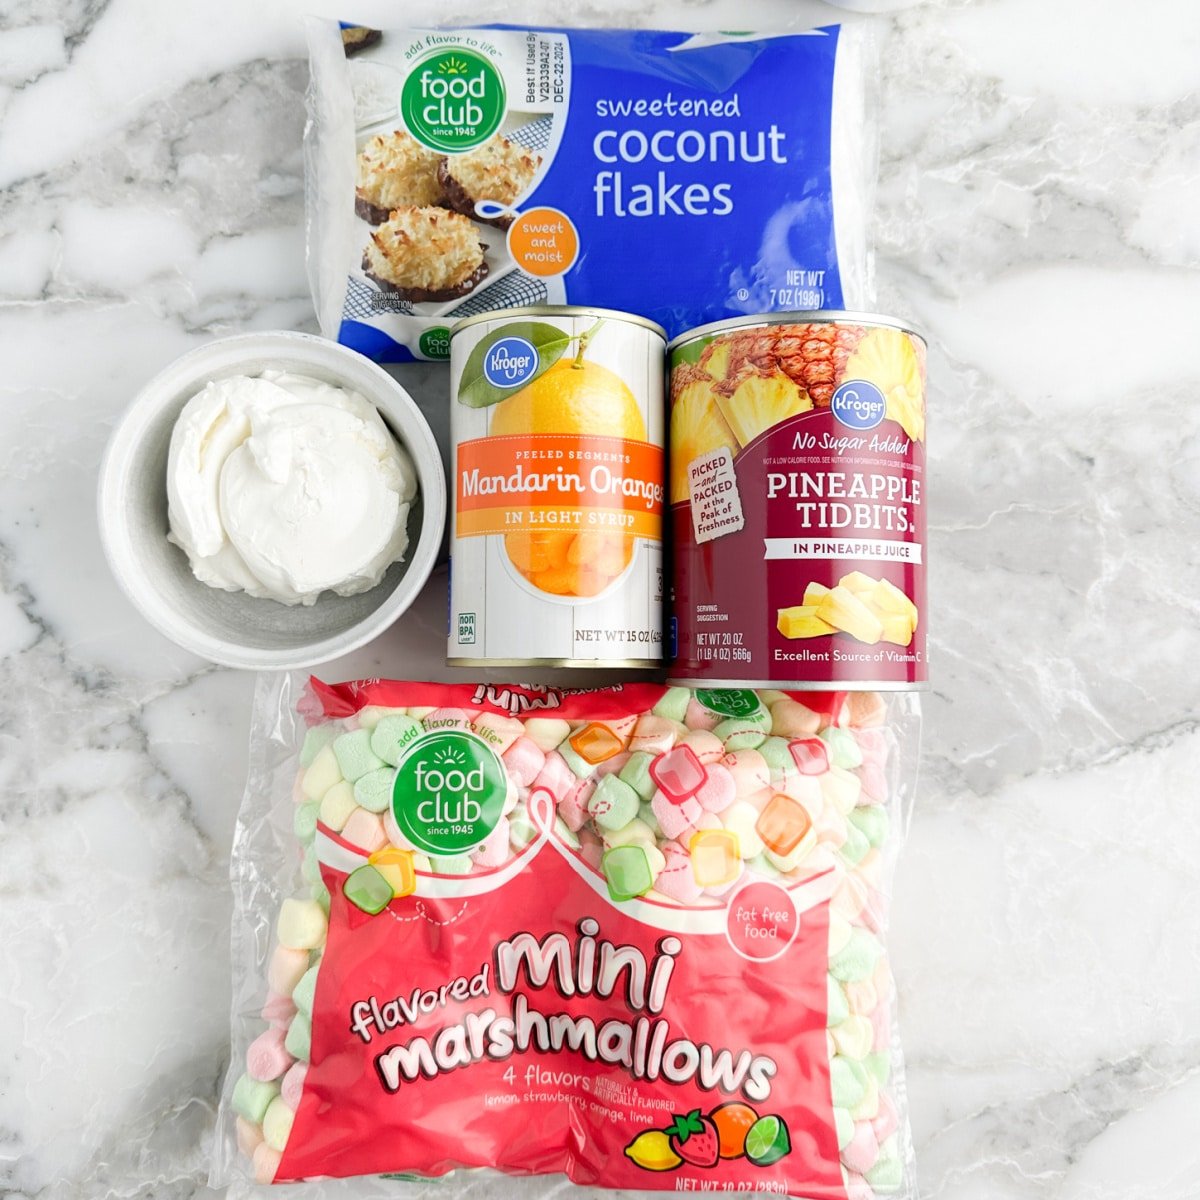 Bag of sweetened coconut, bowl of sour cream, cans of mandarin oranges, pineapple, and bag of colorful marshmallows. 